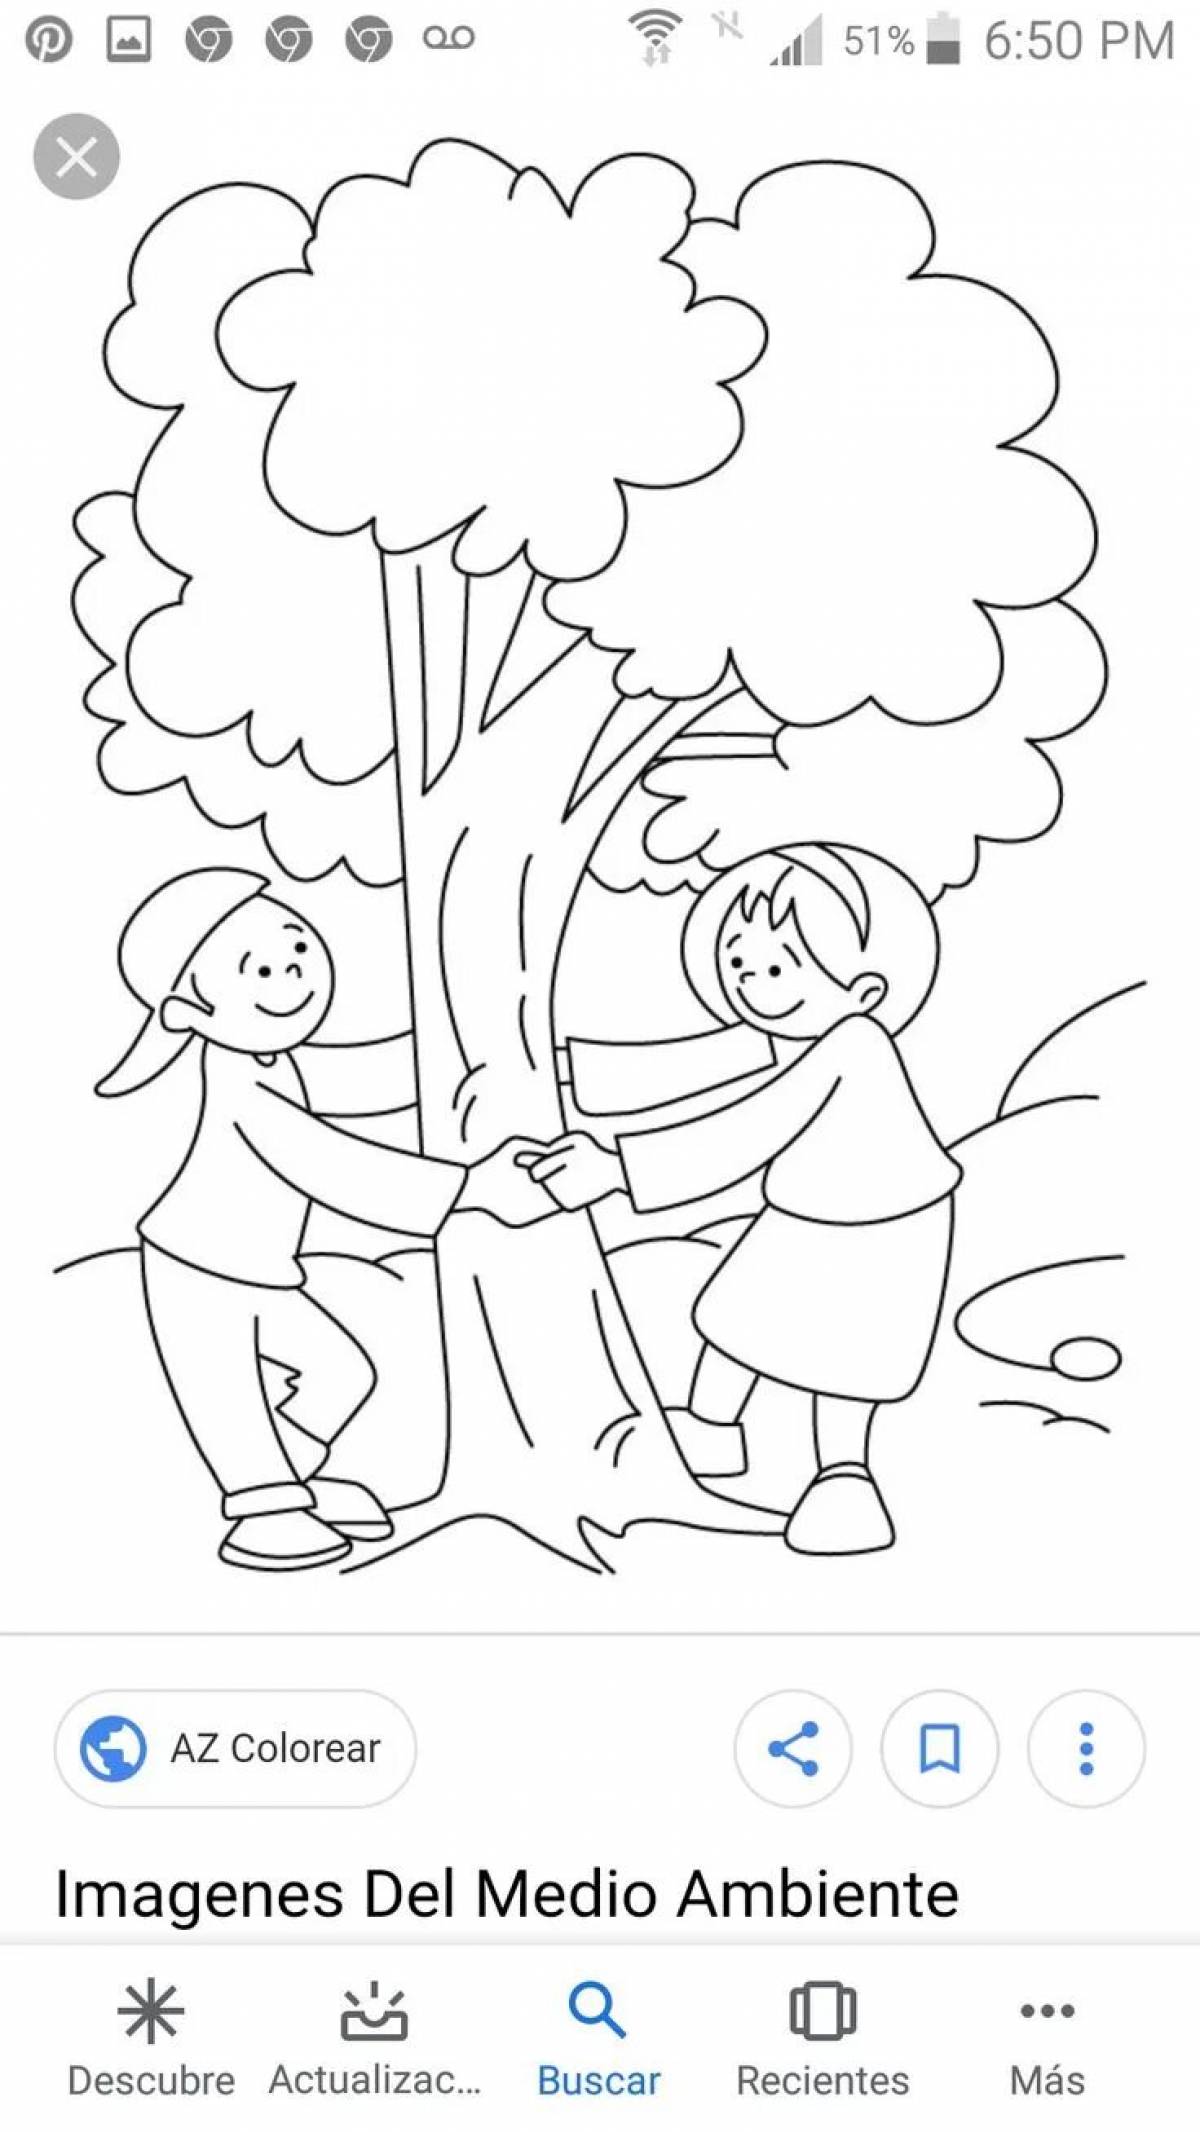 Fun coloring book on the theme of nature take care of nature